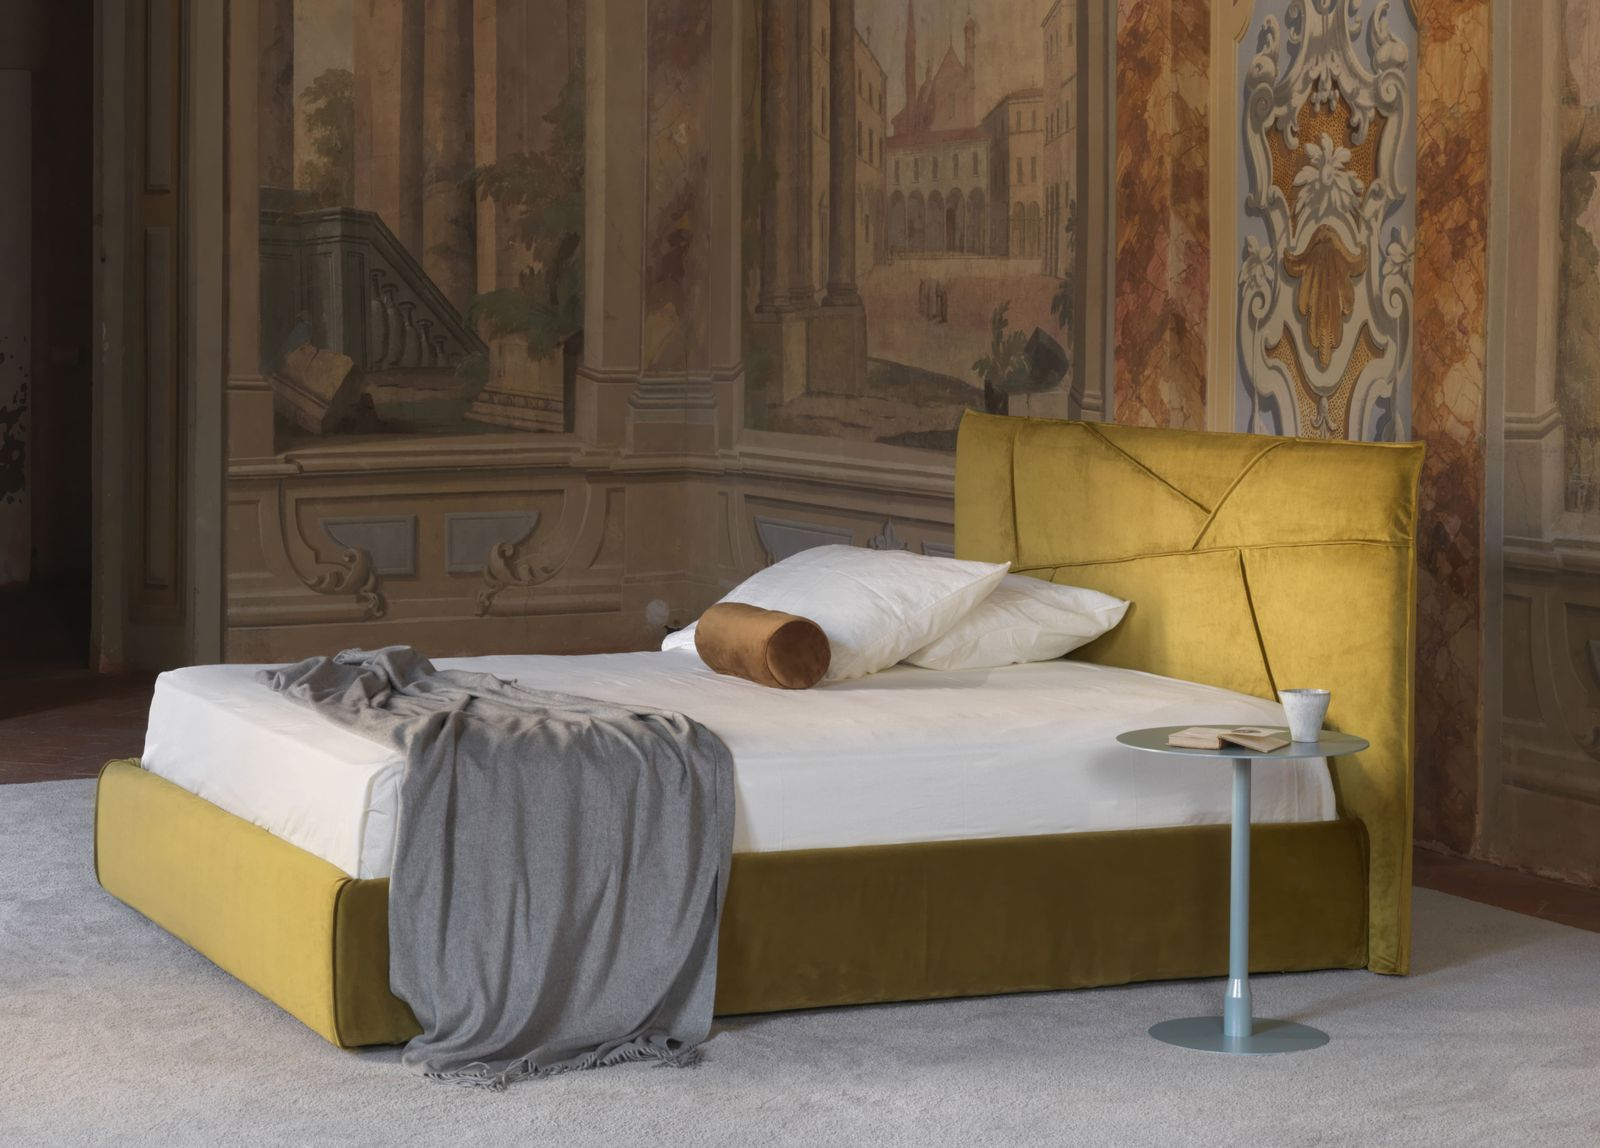 Paths bed , design by Ilaria Marelli. Images courtesy of Enuit21.